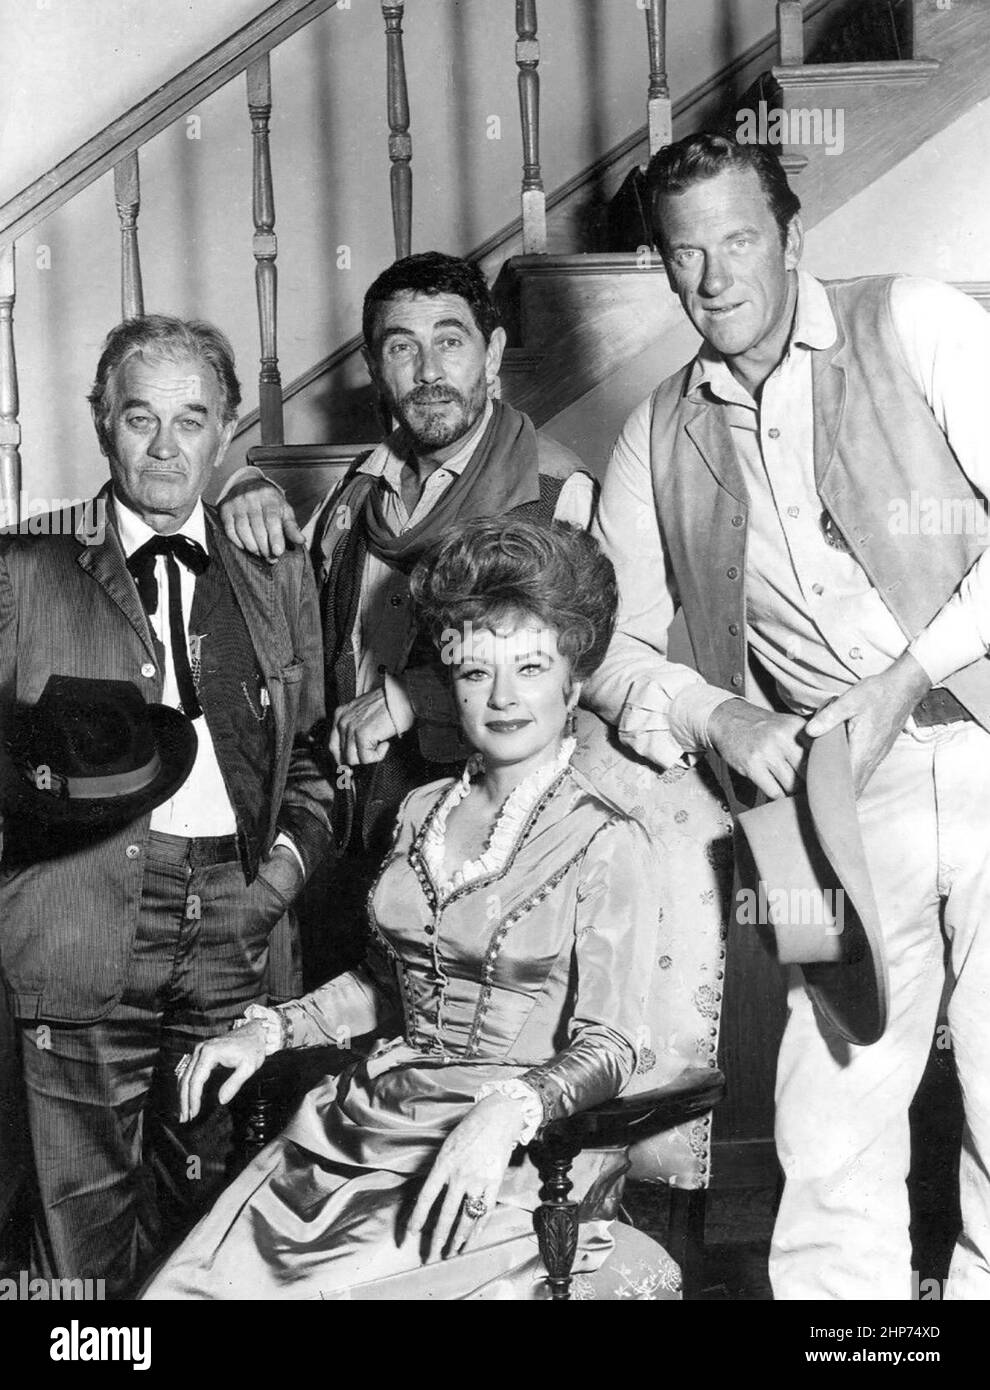 Main cast photo from the television program Gunsmoke in 1967.  Standing, from right: James Arness as Marshall Matt Dillon, Ken Curtis as Festus Hagen, and Milburn Stone as 'Doc' Adams. Seated: Amanda Blake as 'Miss Kitty' Russell Stock Photo